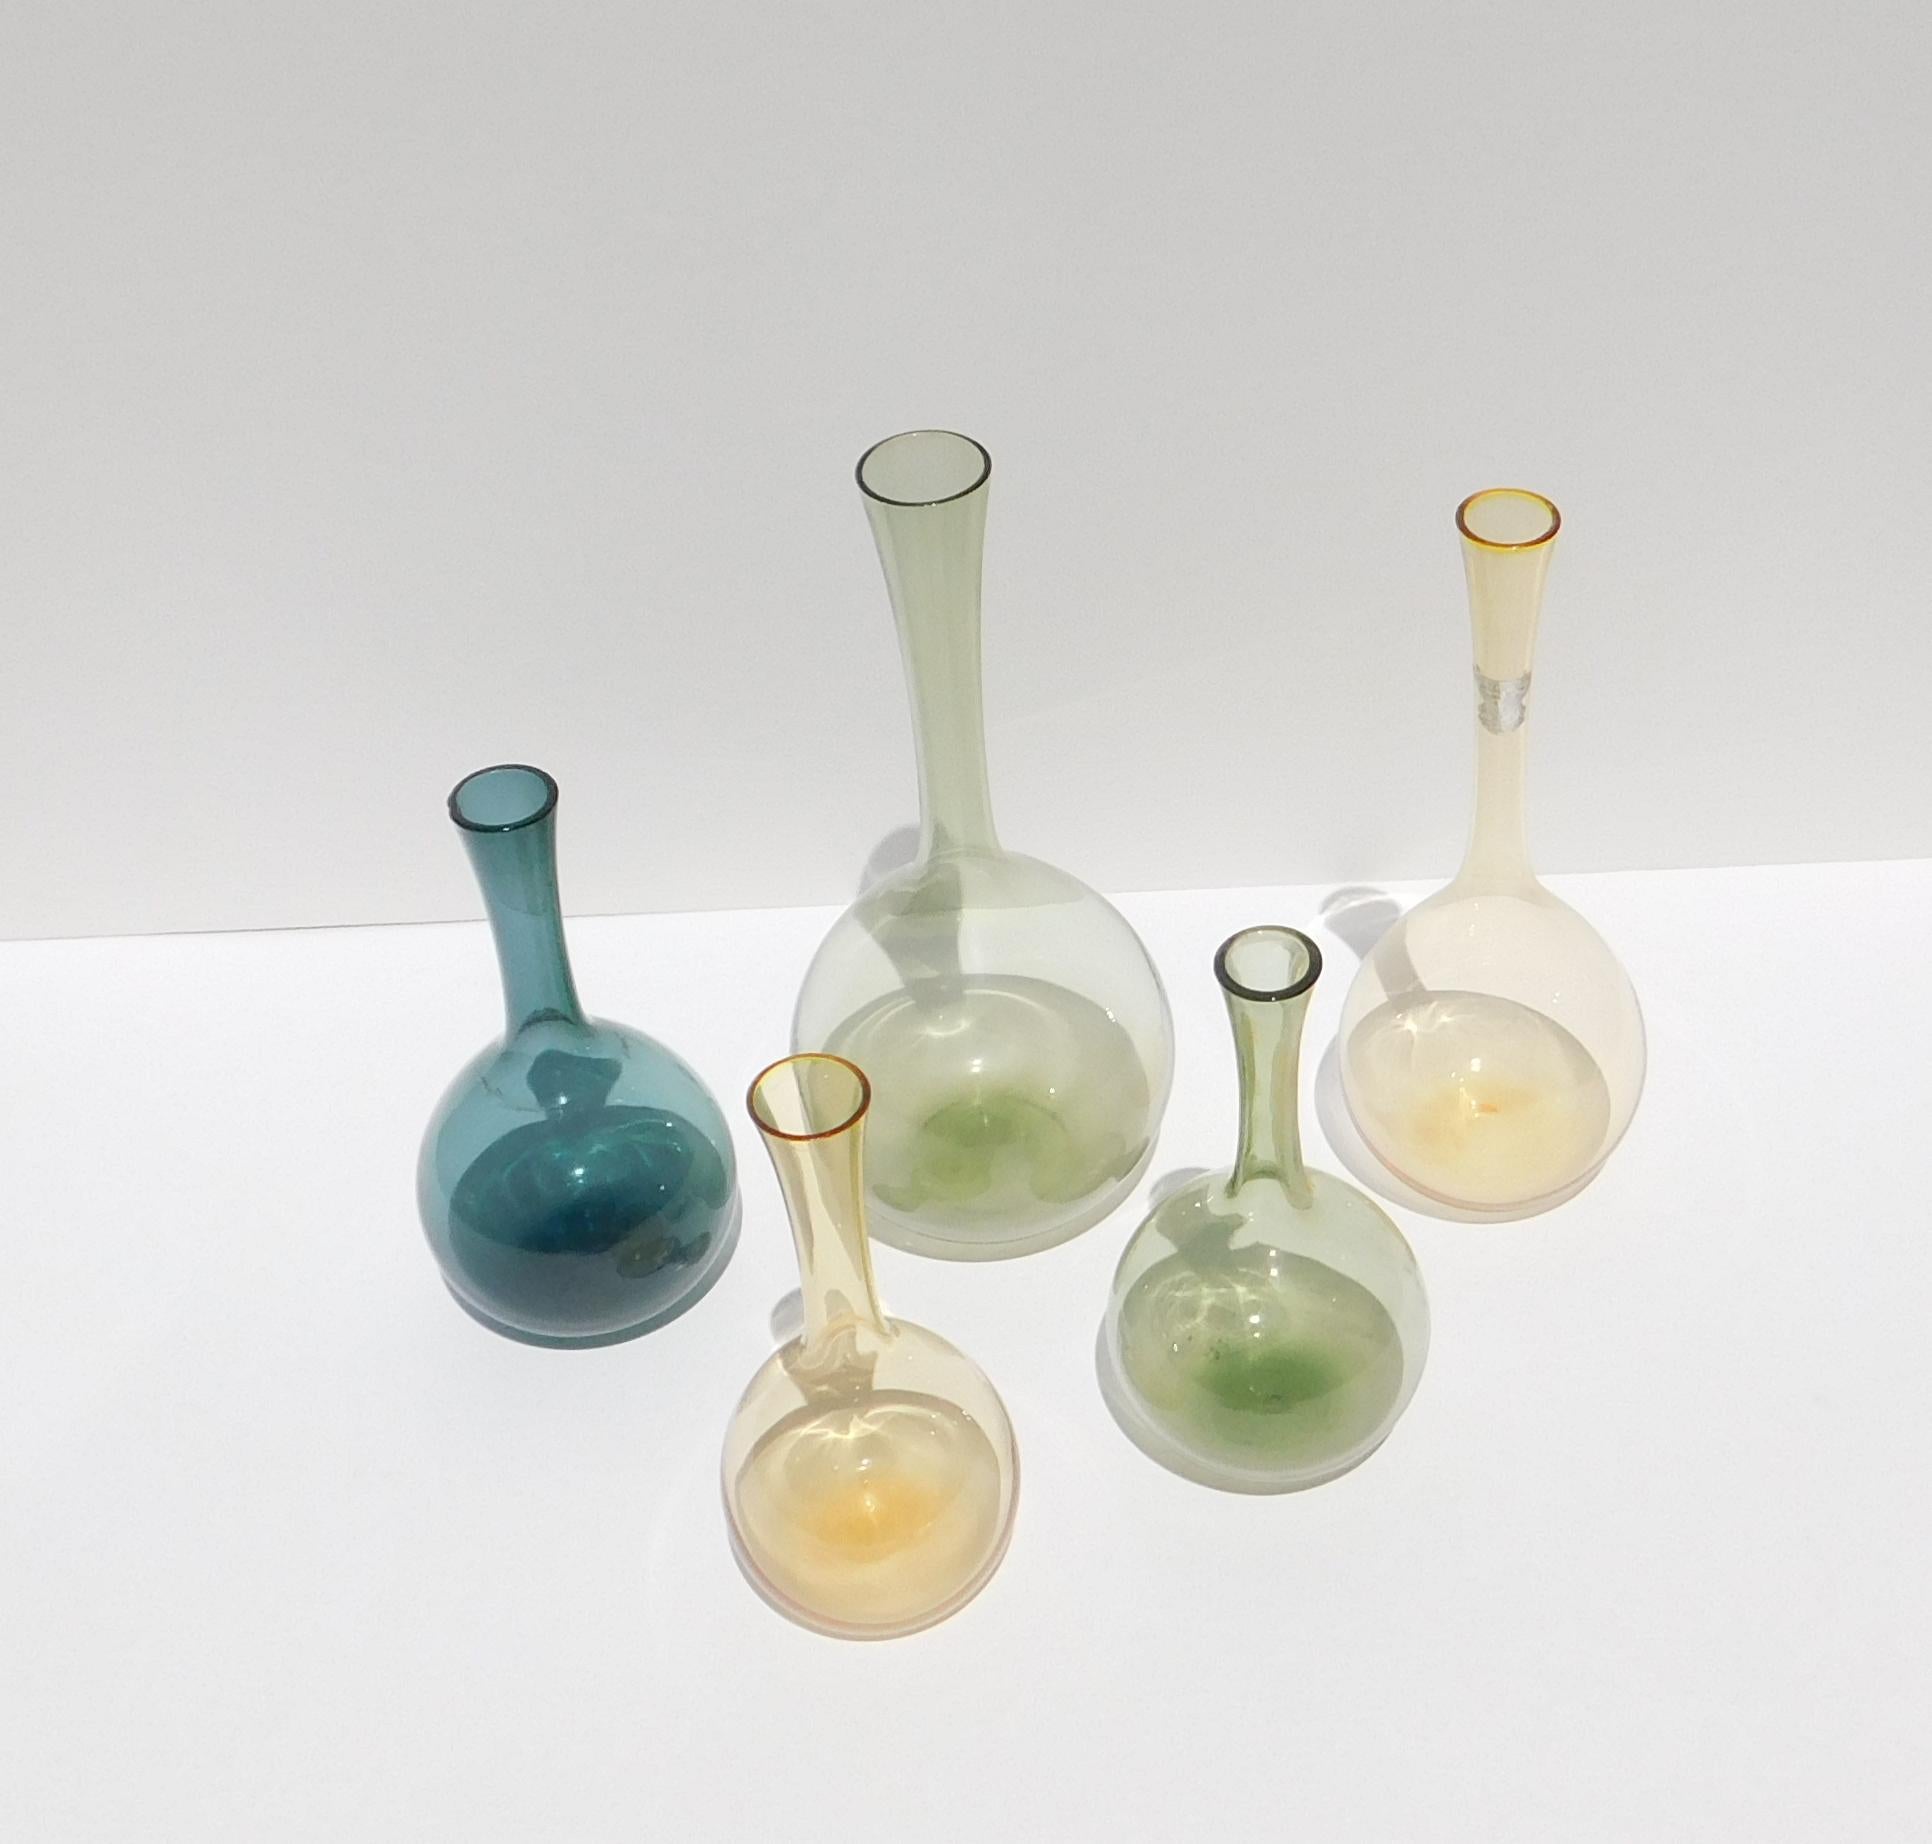 Set of 5 various sized Swedish glass bottles made by Gullaskruf.
Designed by Arthur Percy, circa 1950s.

The bottles measure largest to smallest:
Green: 7 1/4